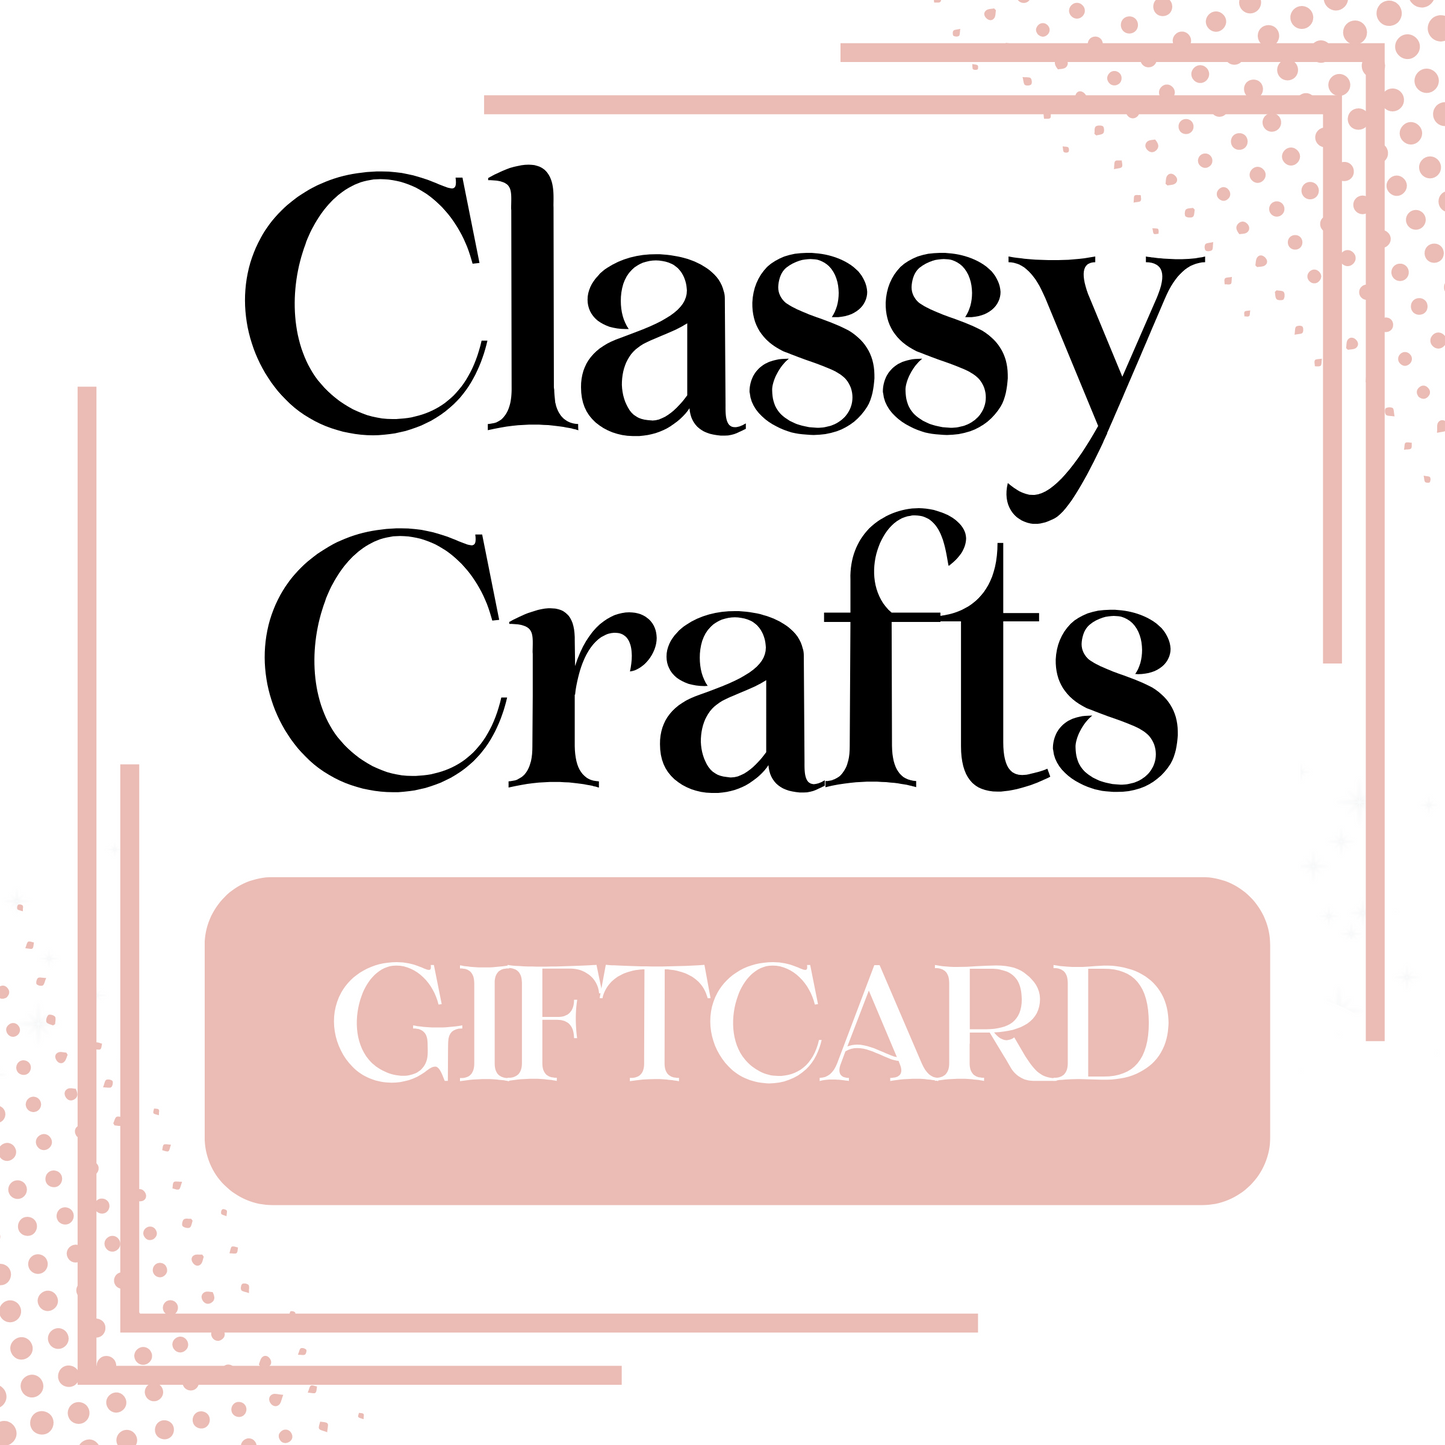 Classy Crafts Gift Card